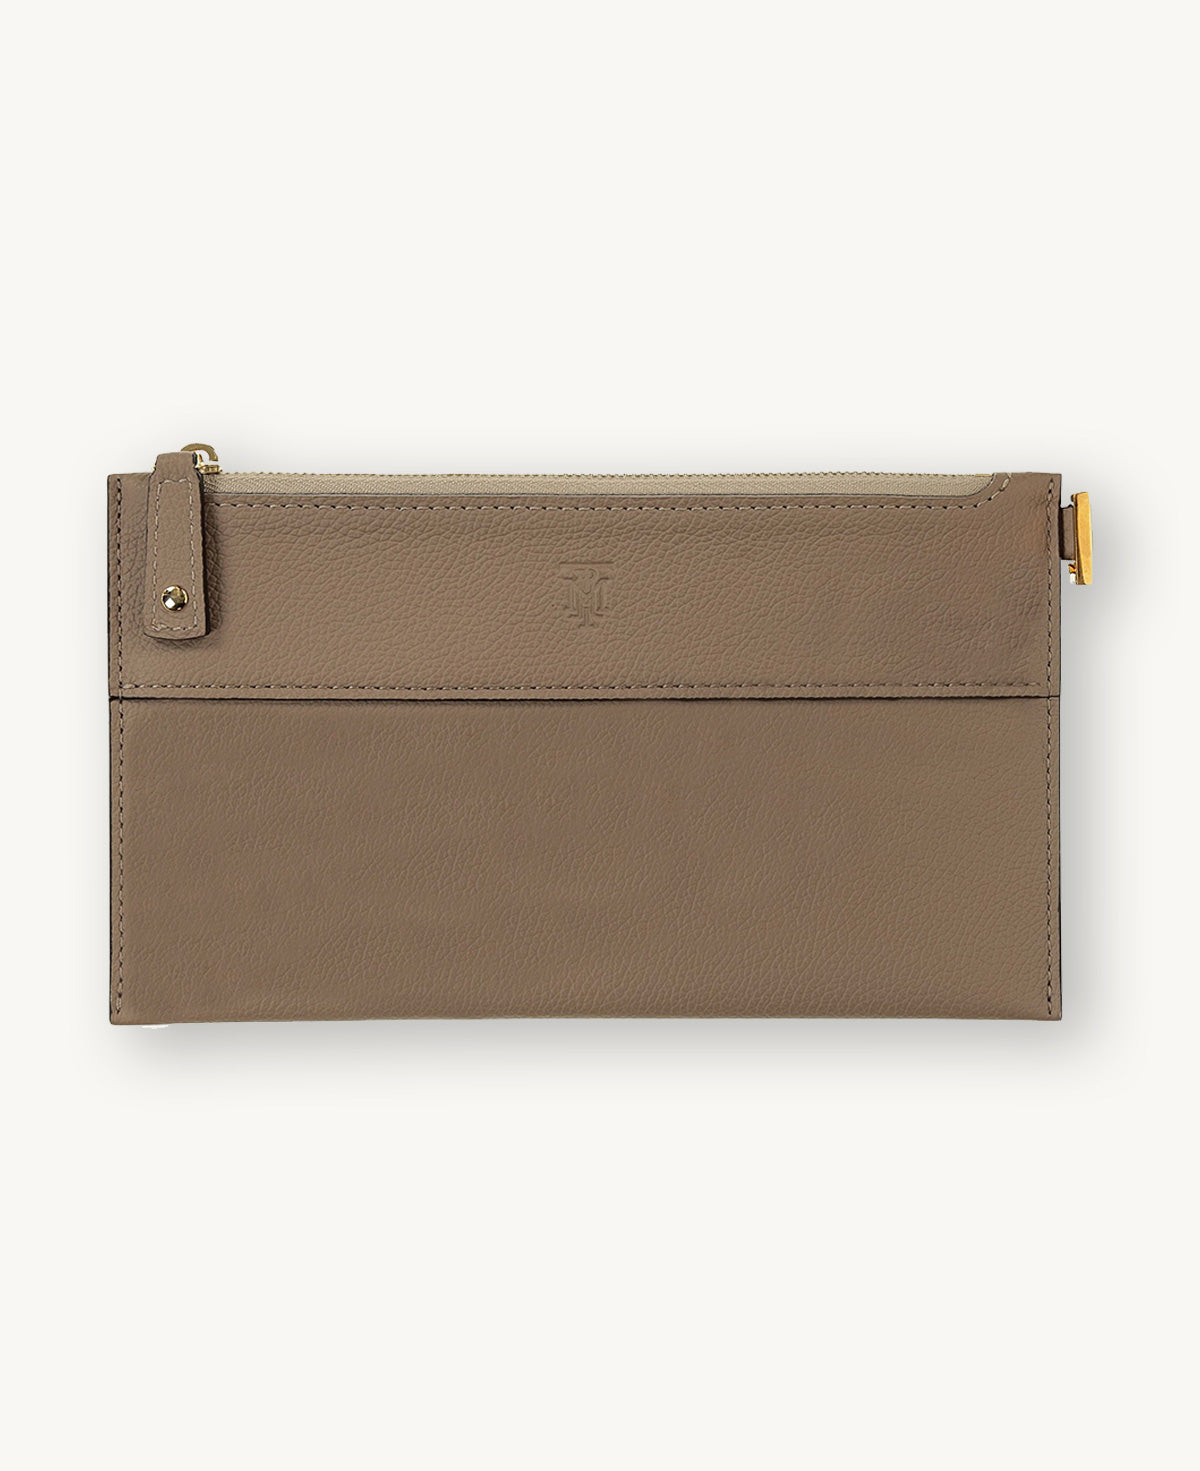 POUCH SMALL BEIGE